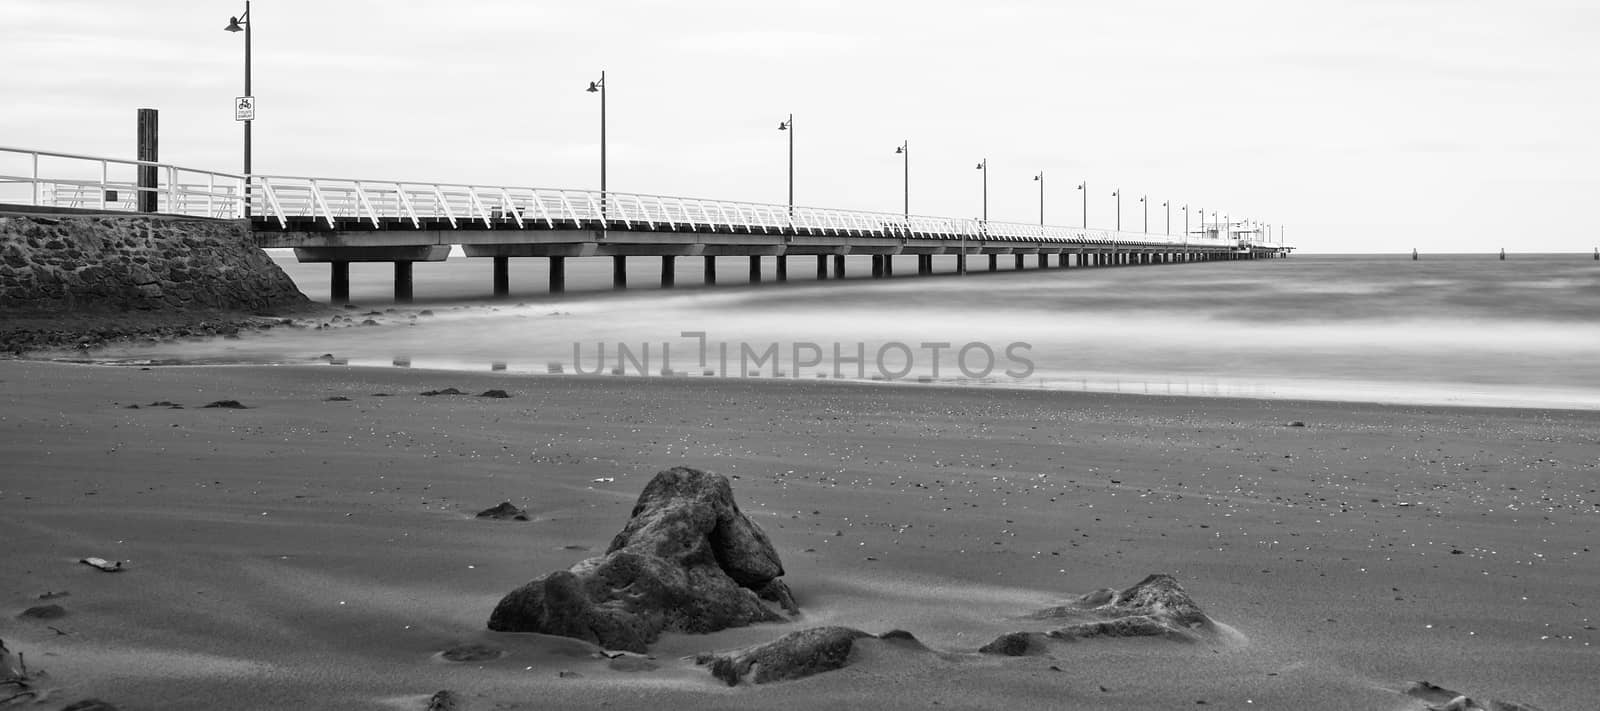 Black and white image of Shorncliffe Pier by artistrobd